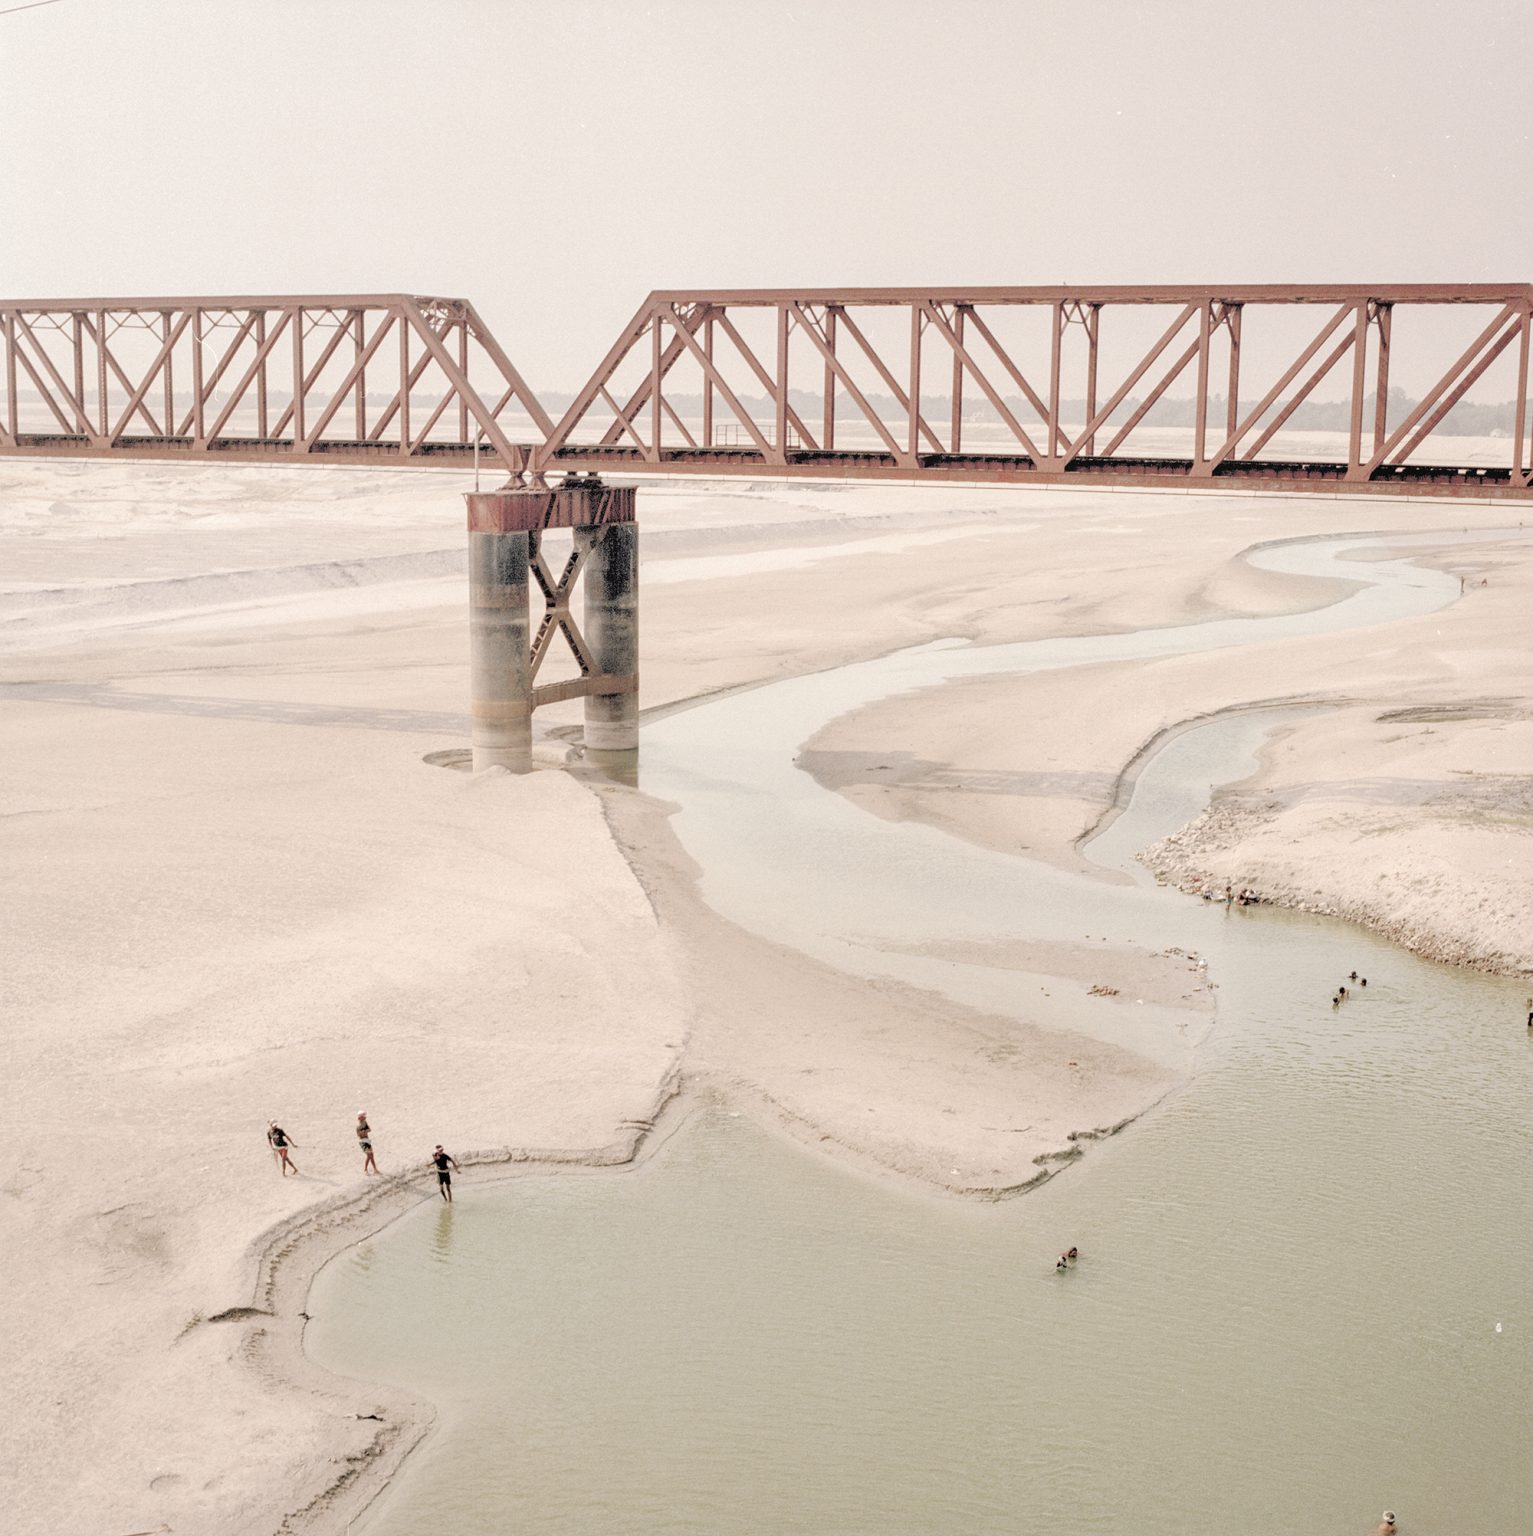 Every year, during the dry season, the river on the Bangladesh border dries up due to the Farakka Dam being closed on the Indian border.